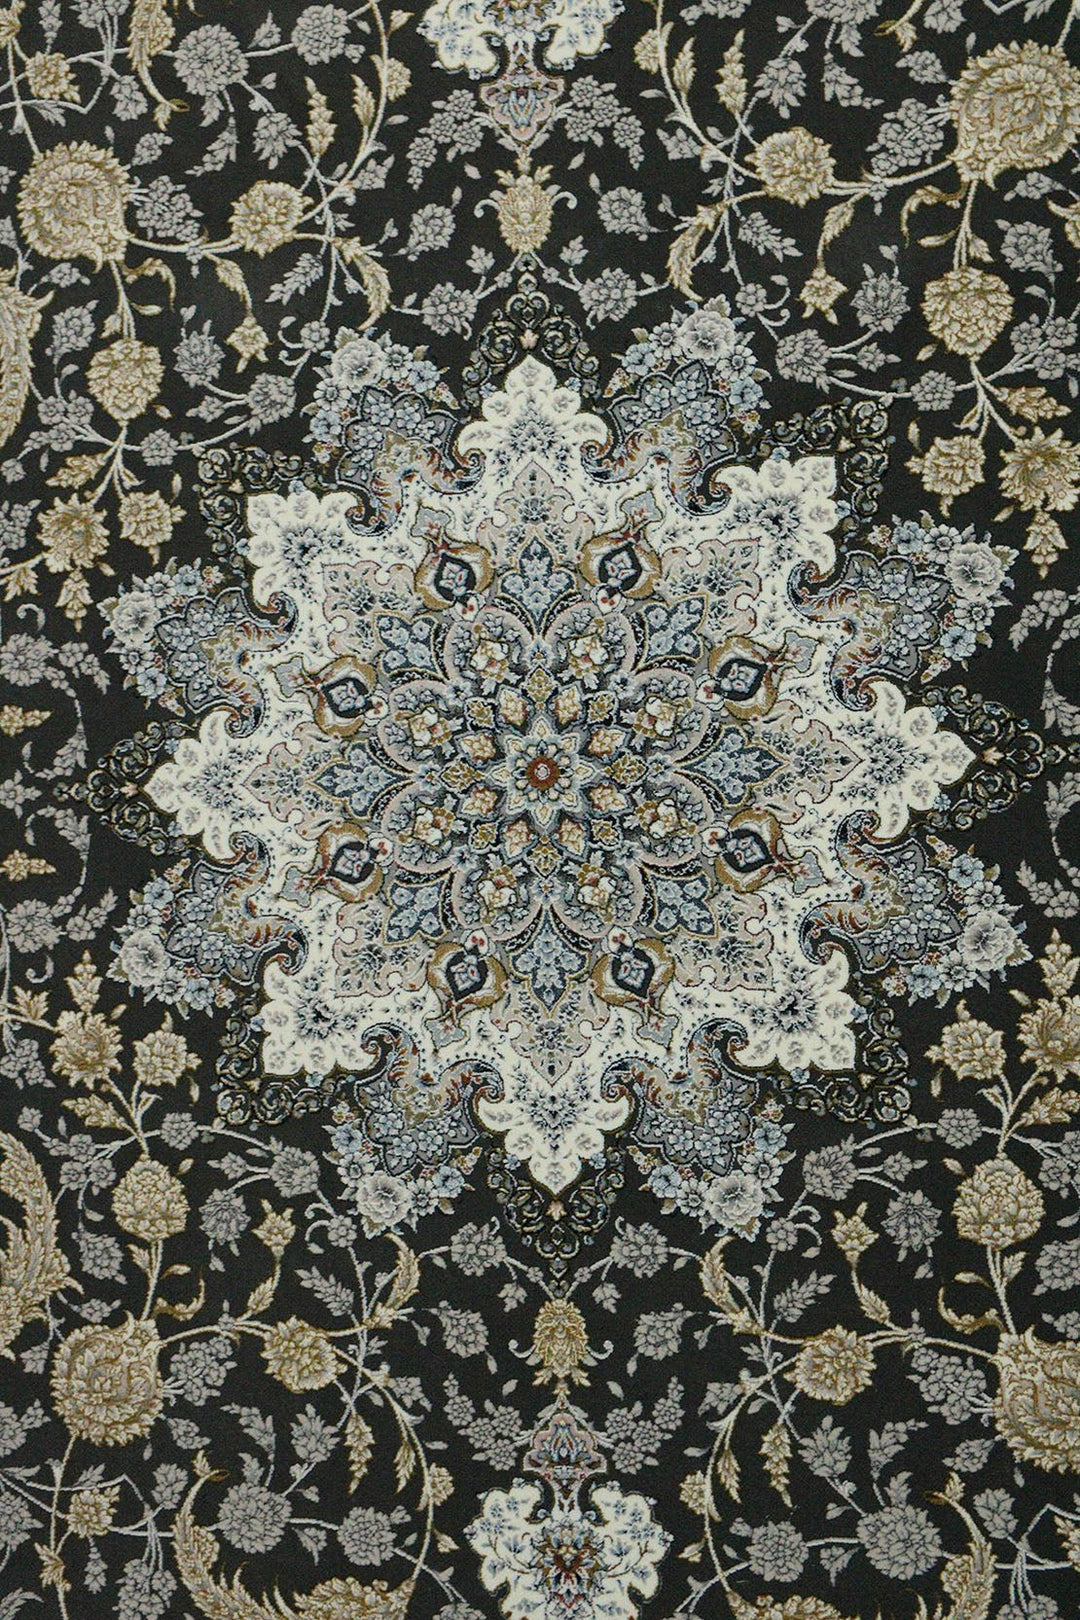 Iranian Premium Quality Authentic 1500 Rug - 4.9 x 7.3 FT - Cream - Resilient Construction for Long-Lasting Use - V Surfaces